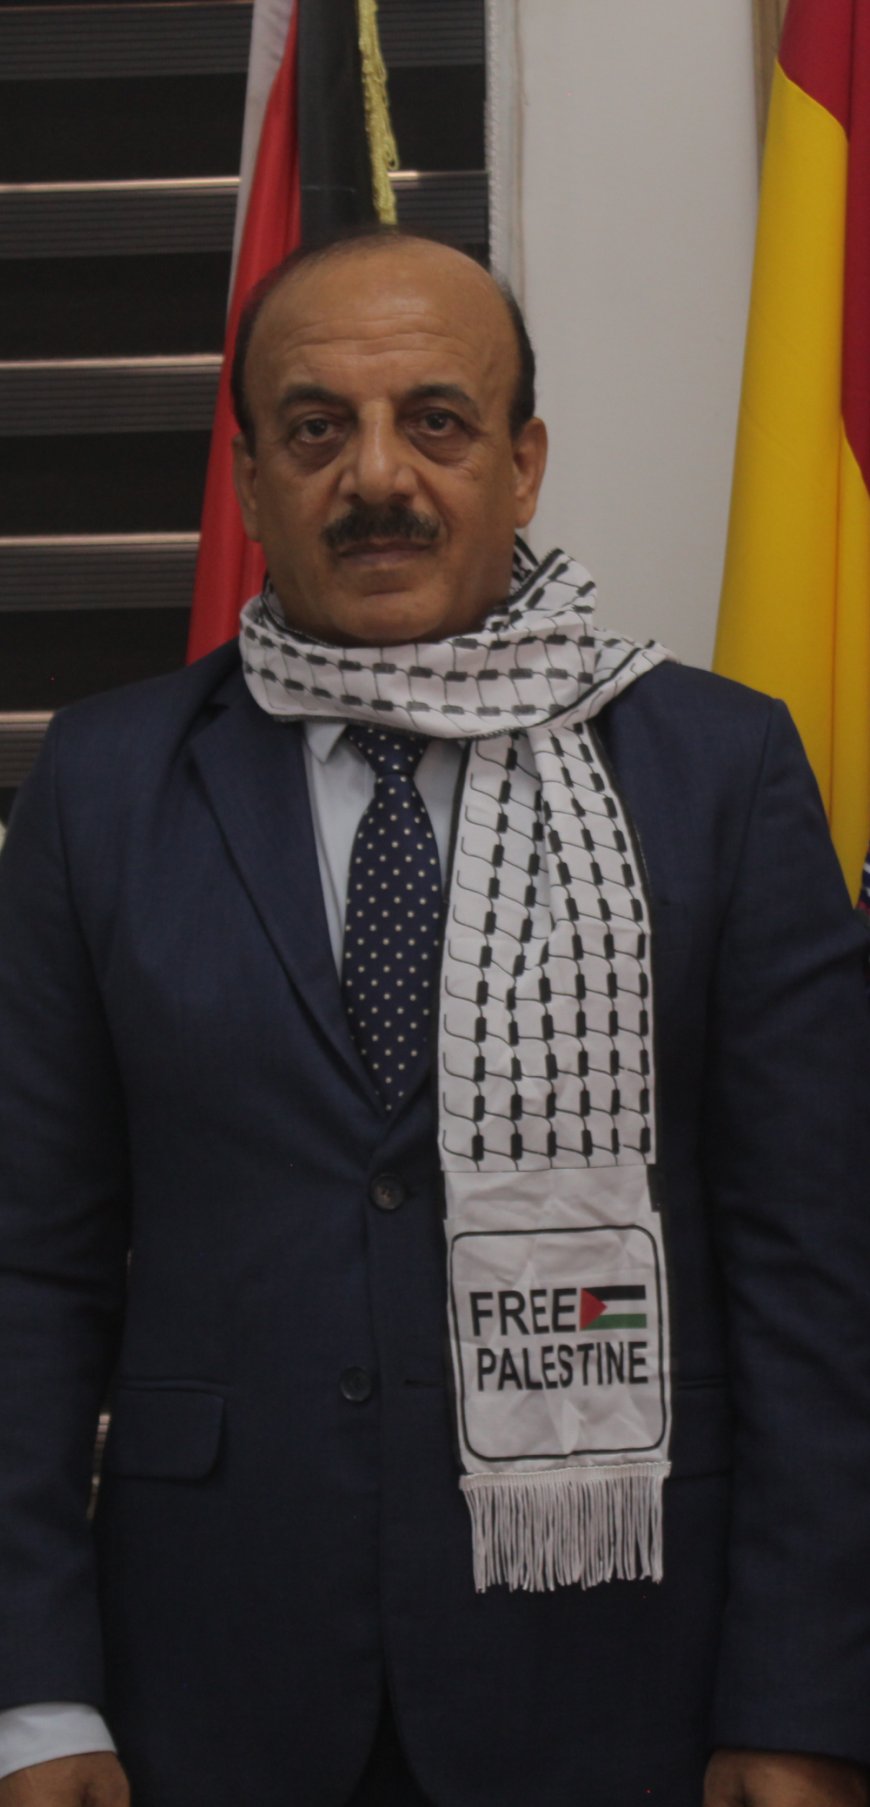 Palestinian Ambassador to Ghana Urges International Support Amidst Ongoing Conflict with Israel